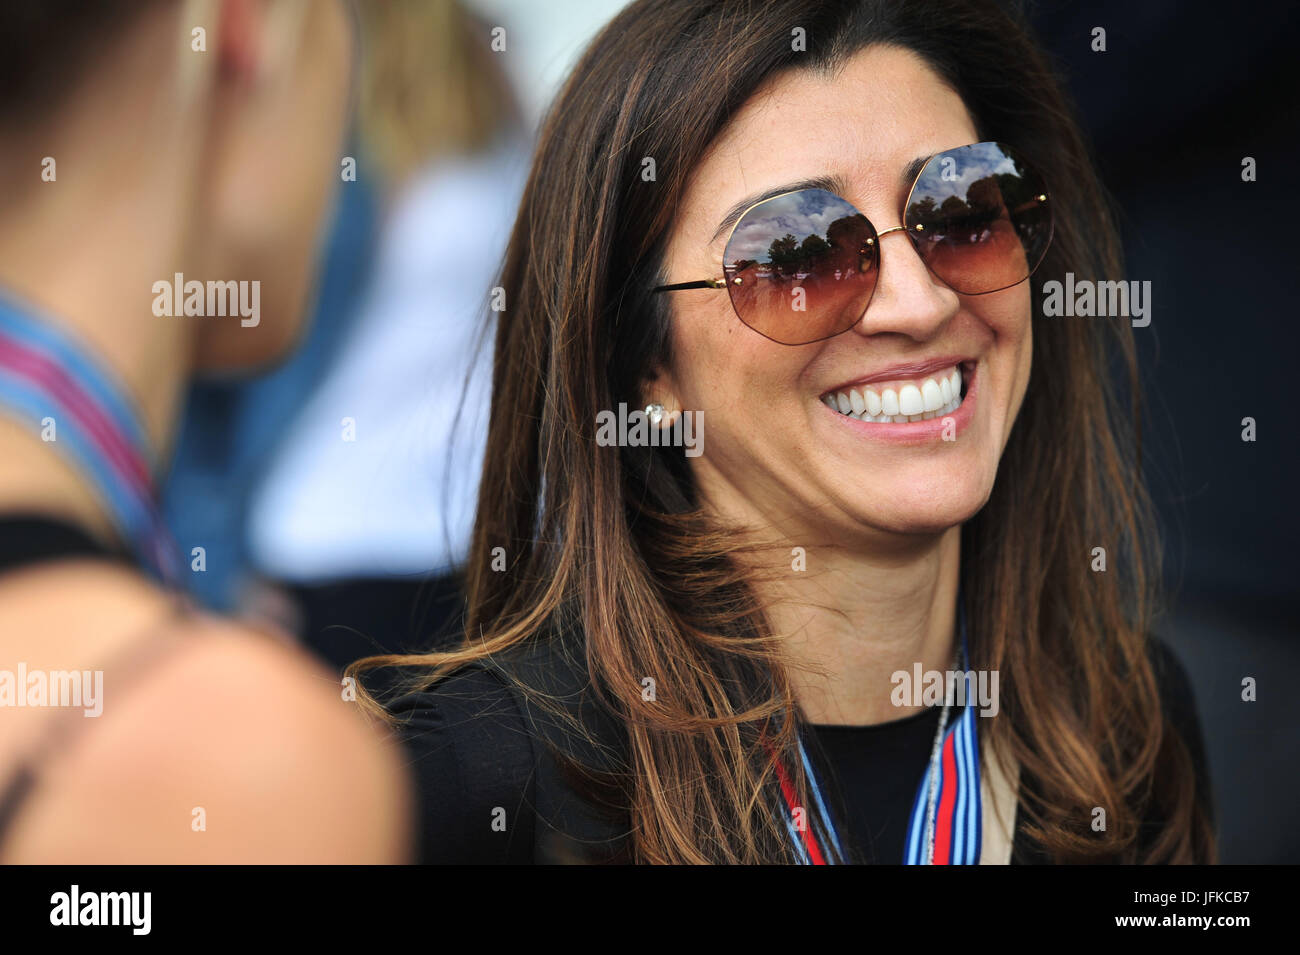 Goodwood, Chichester, UK. Saturday 1st July 2017. Fabiana Flosi, Bernie Ecclestone's wife, at the Goodwood Festival of Speed, Goodwood, West Sussex, UK. © Kevin Bennett/Alamy News Stock Photo